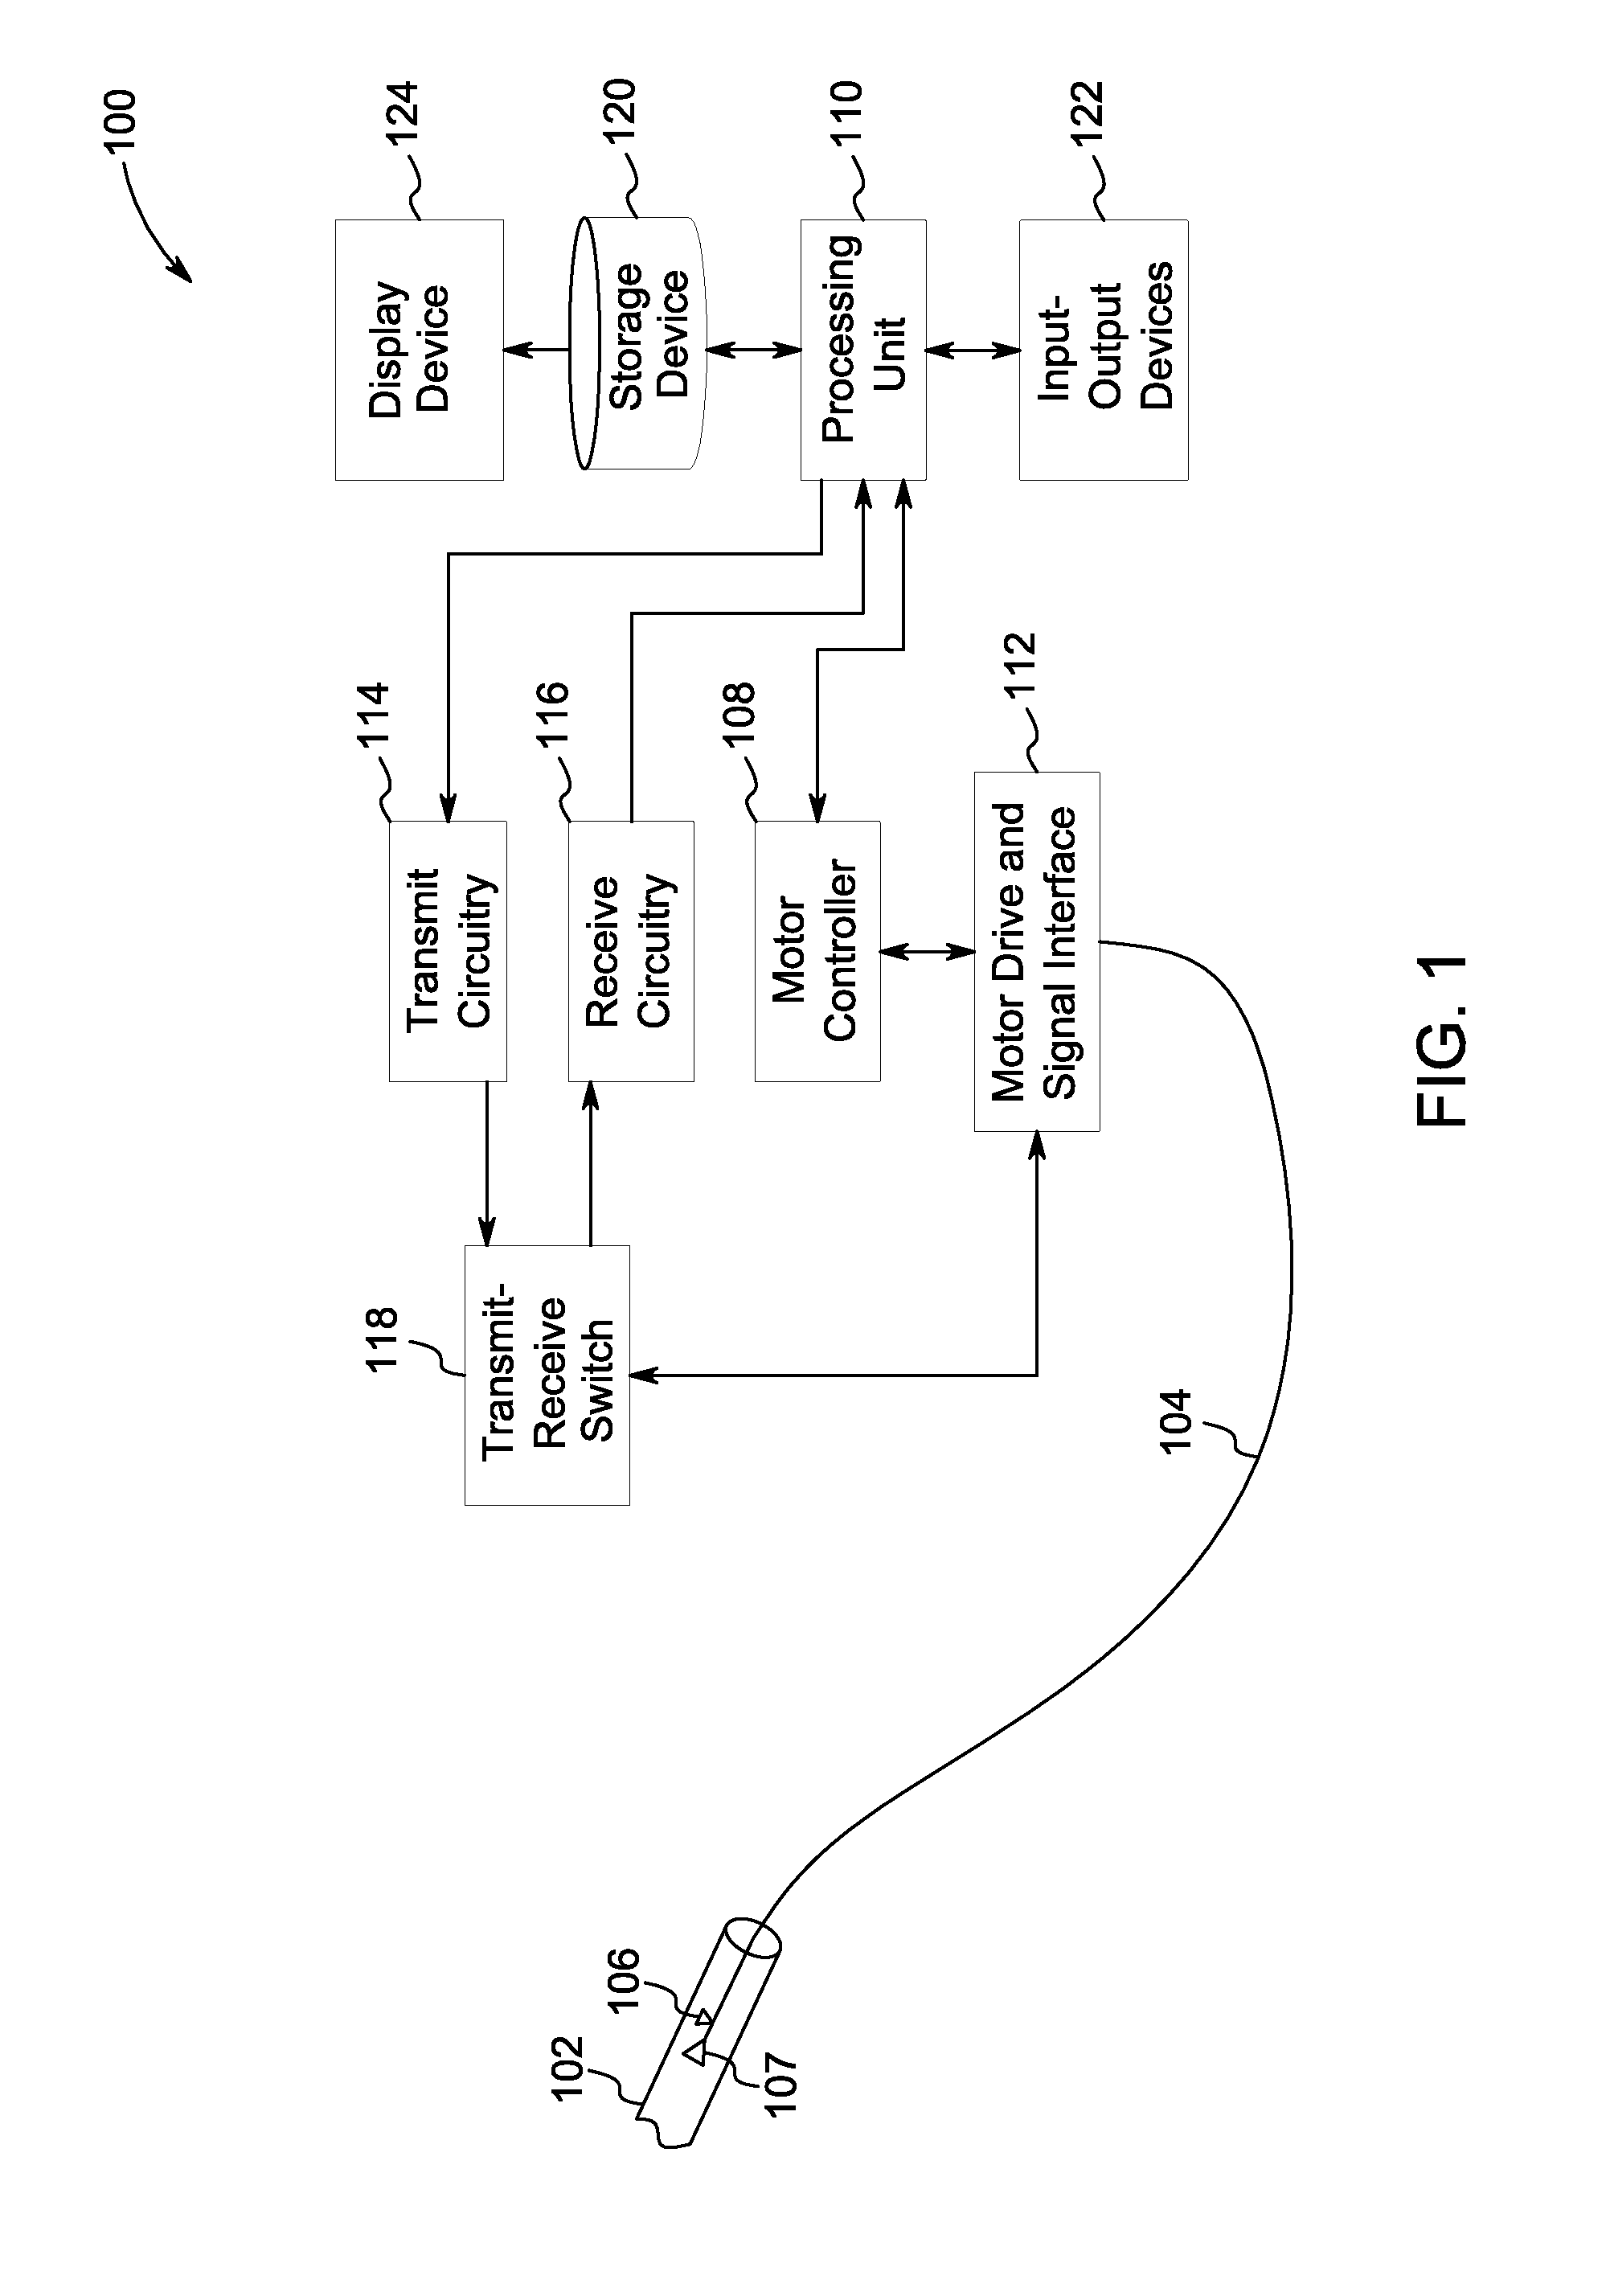 Methods and systems for simultaneous interventional imaging and functional measurements